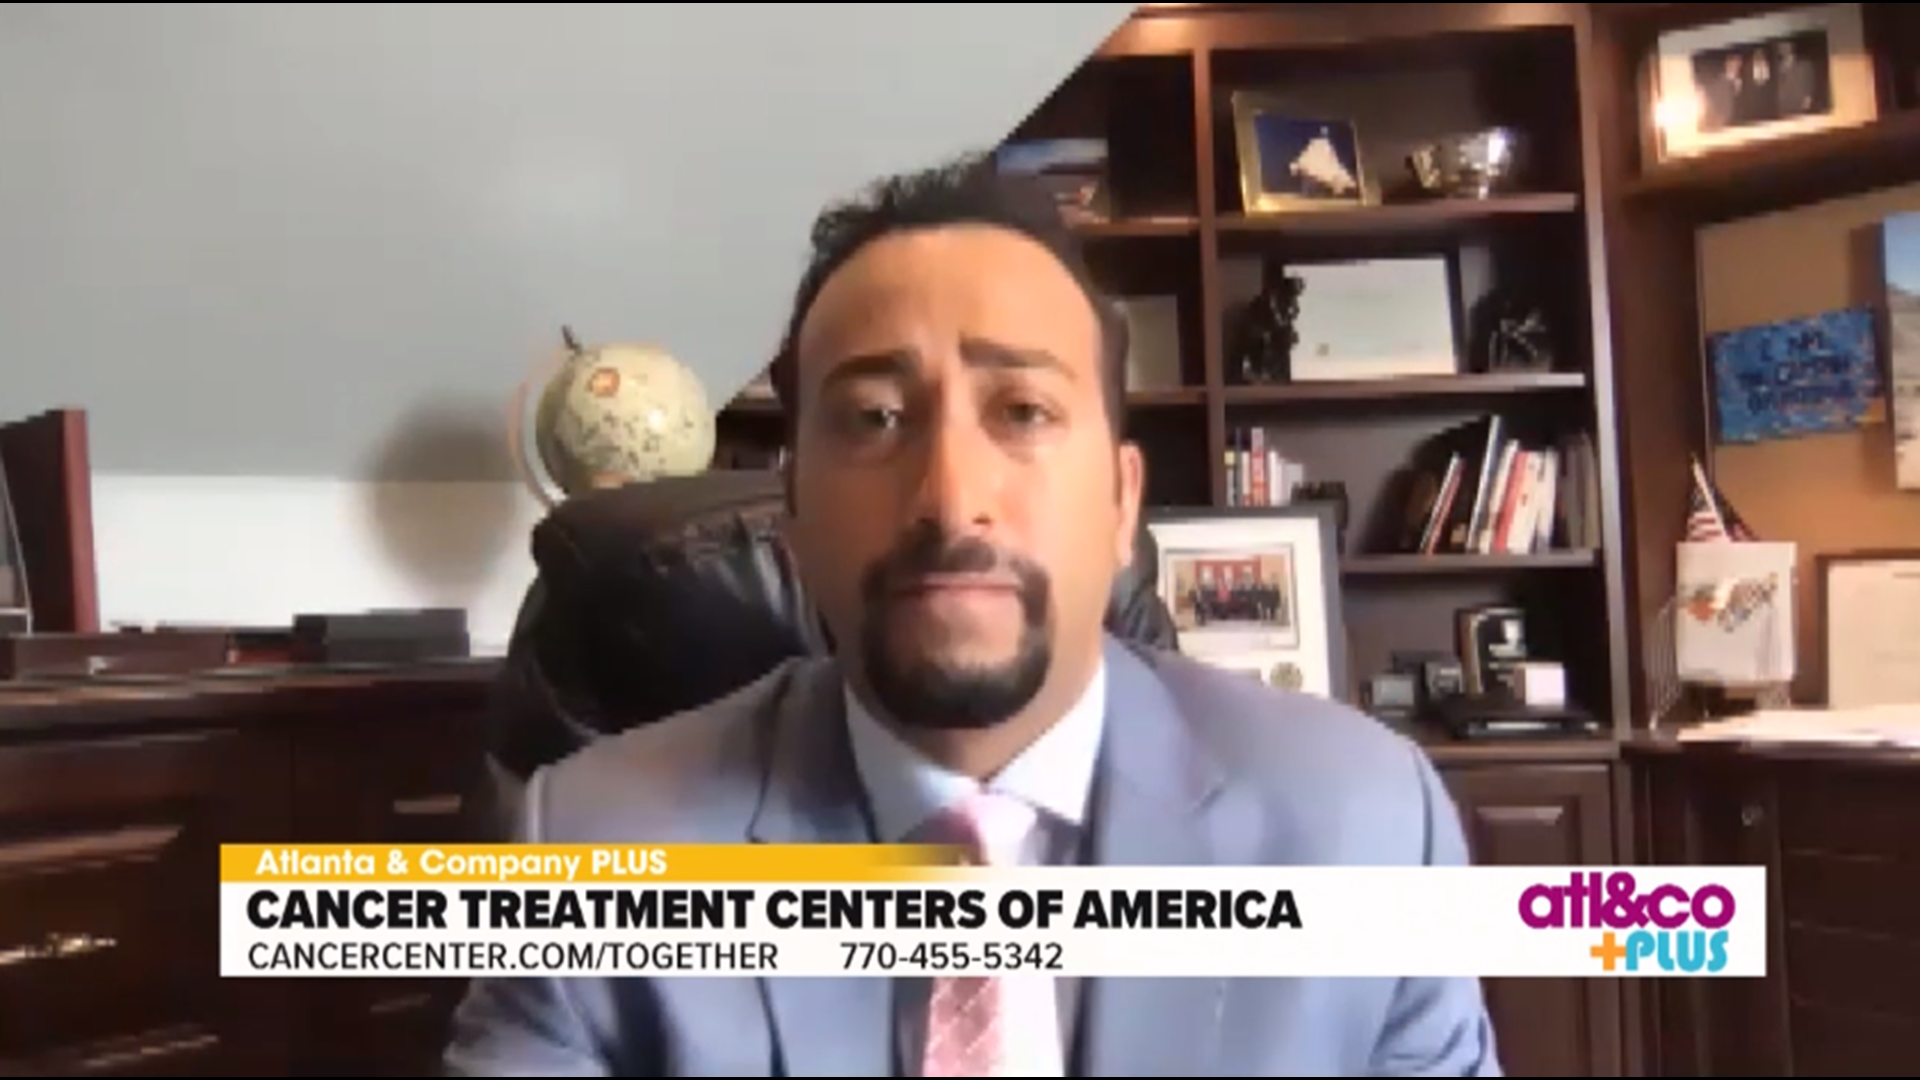 Dr. Pat Basu, President & CEO of Cancer Treatment Centers of America, discusses the implications of COVID-19 on patients currently undergoing cancer treatment.